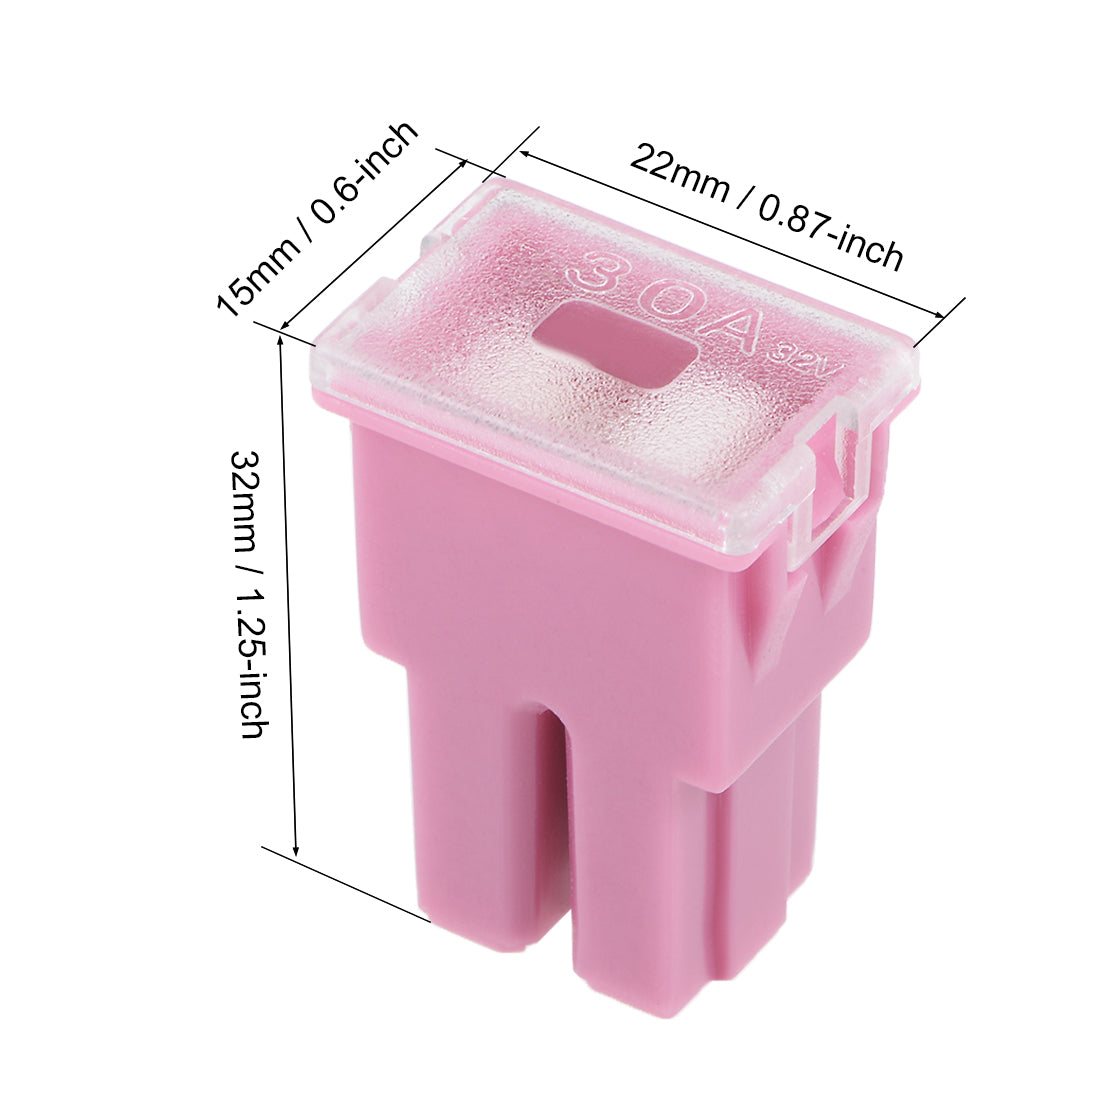 uxcell Uxcell Mini Cartridge Fuse 32V 30A Female J Case Box for Truck SUV Vehicle 3pcs